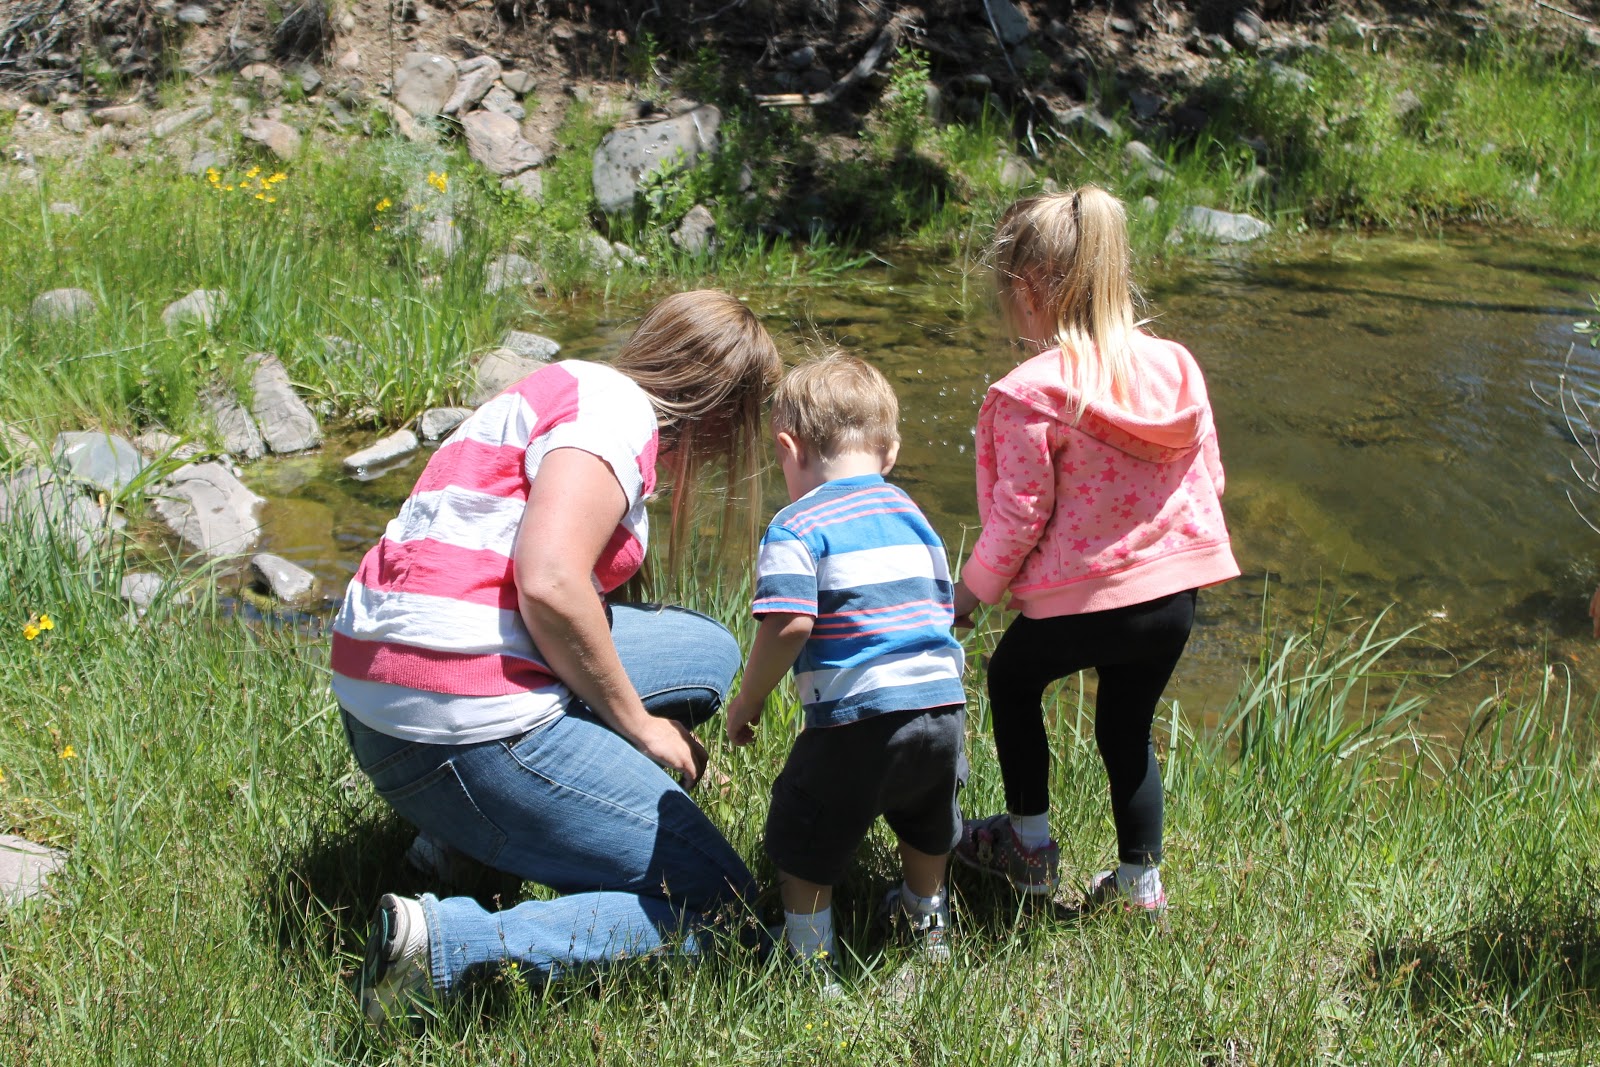 We love to explore new creeks. It's one way we work as a family to live naturally